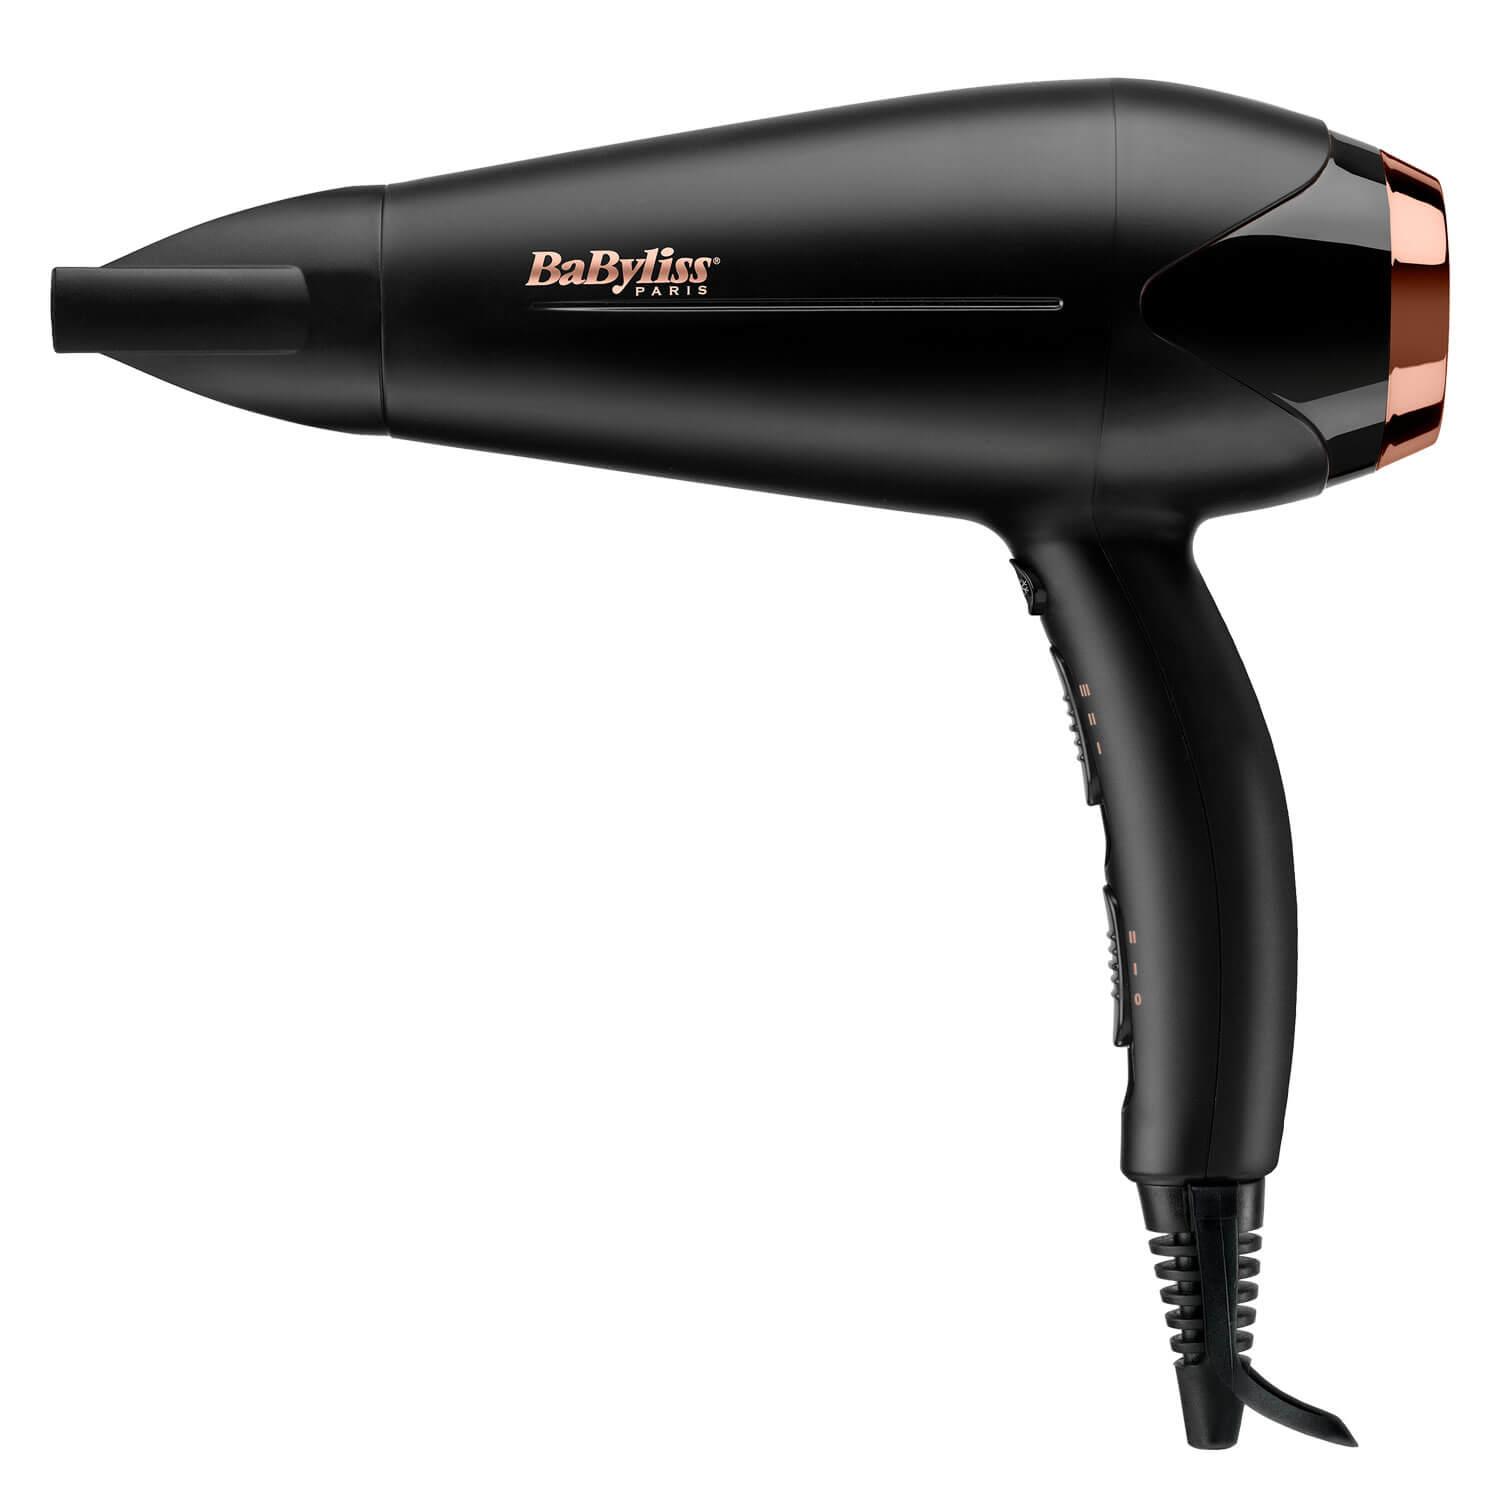 BaByliss - Hairdryer Turbo Shine 2200W D570DCHE